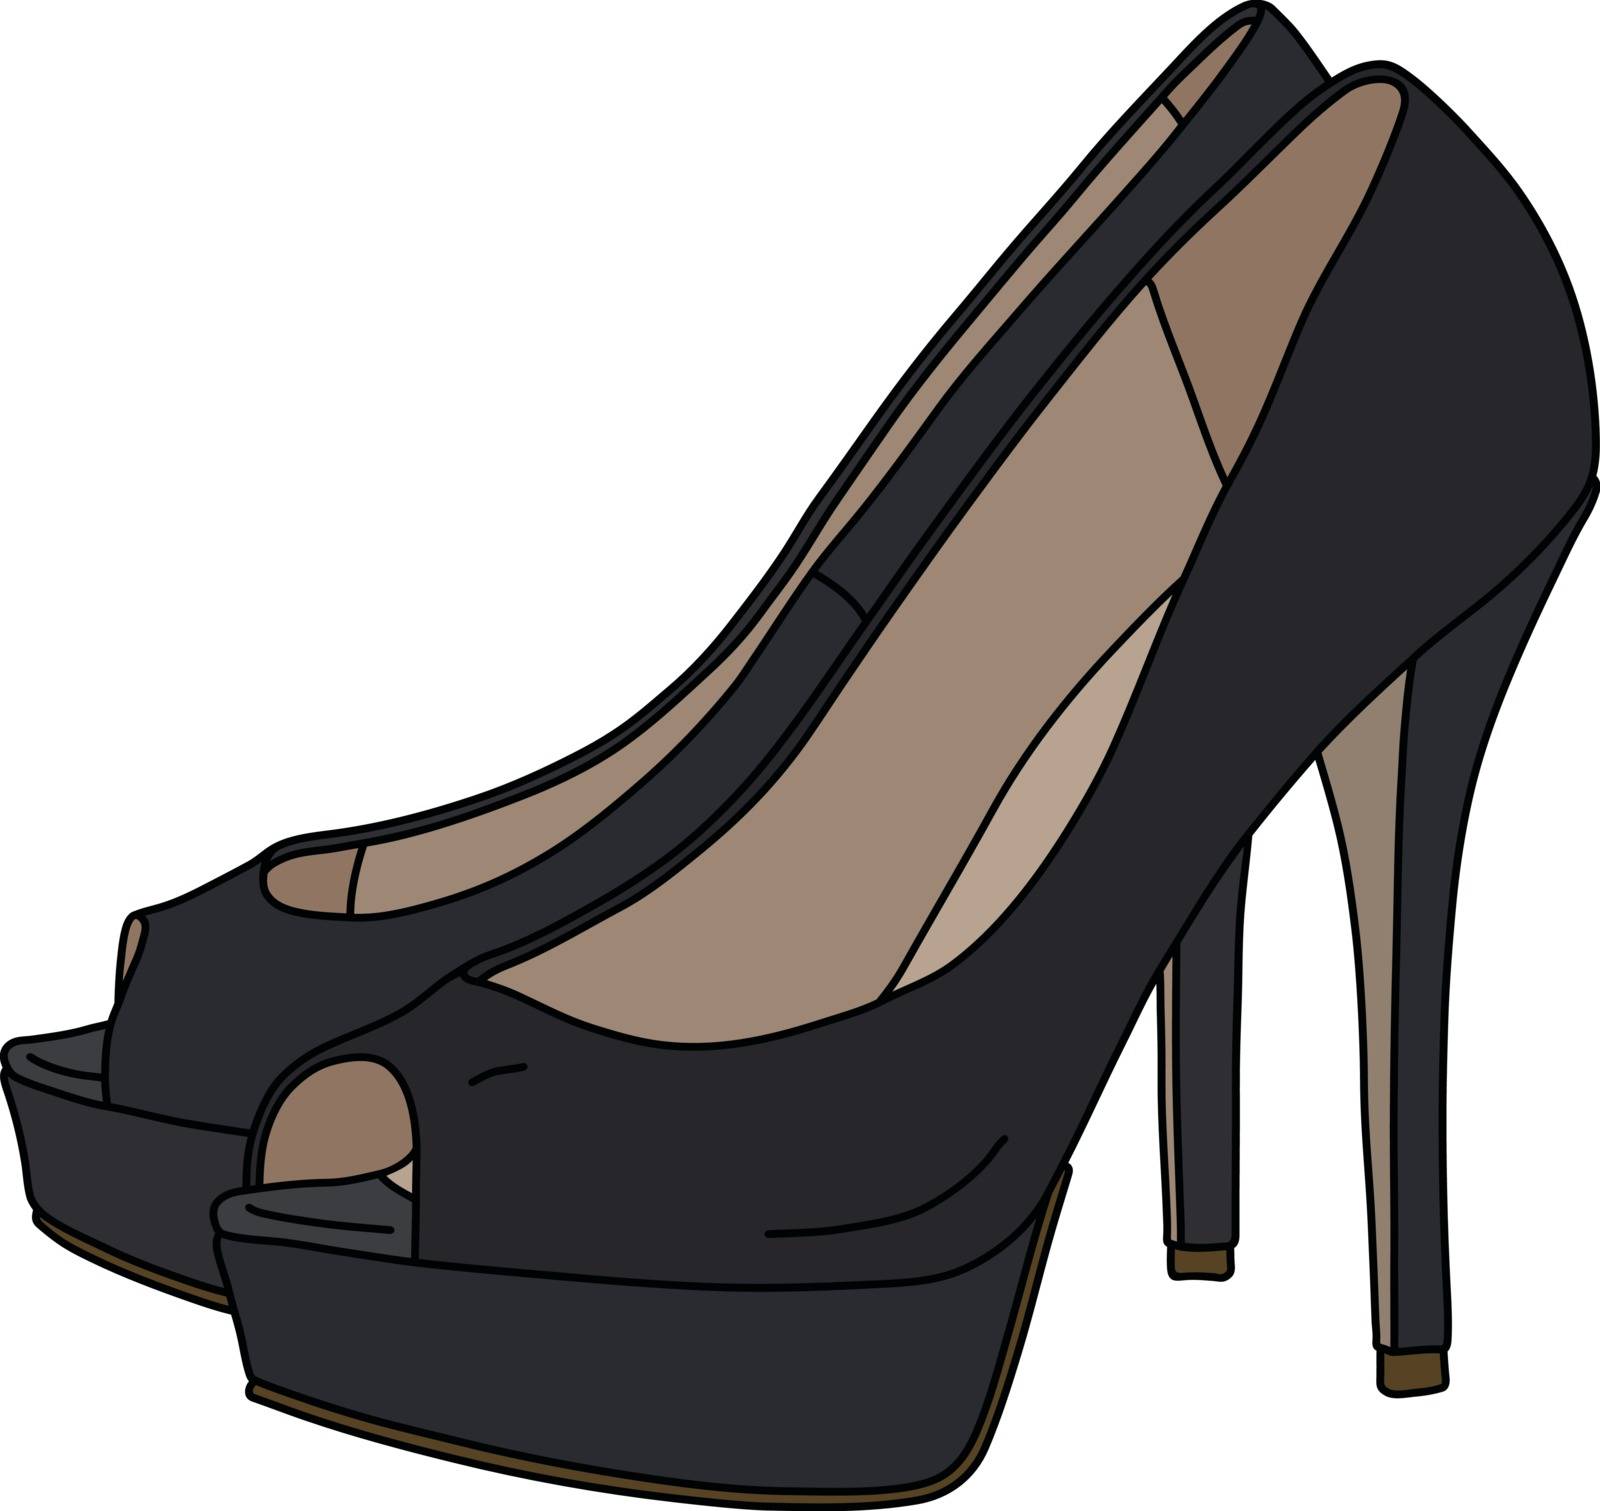 The vectorized hand drawing of black womans shoes on high heels